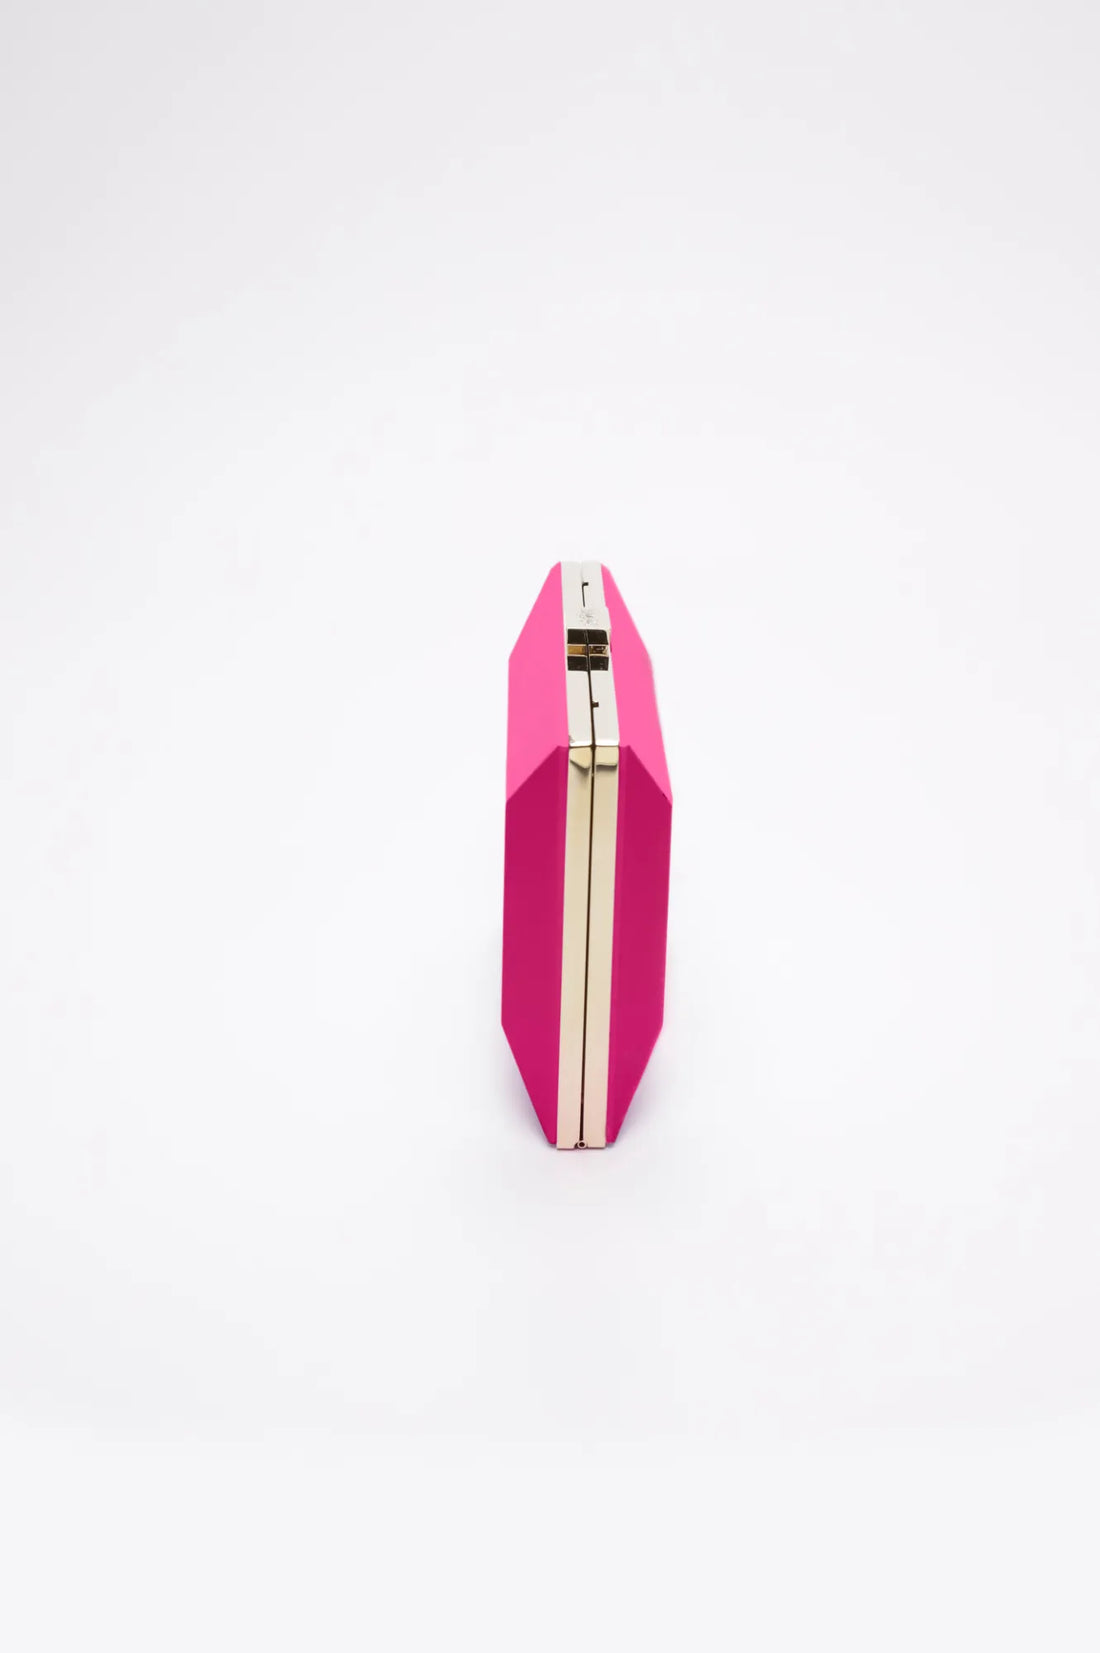 A Milan Clutch x MICAELA - Hot Pink Metallic from The Bella Rosa Collection on a white background.